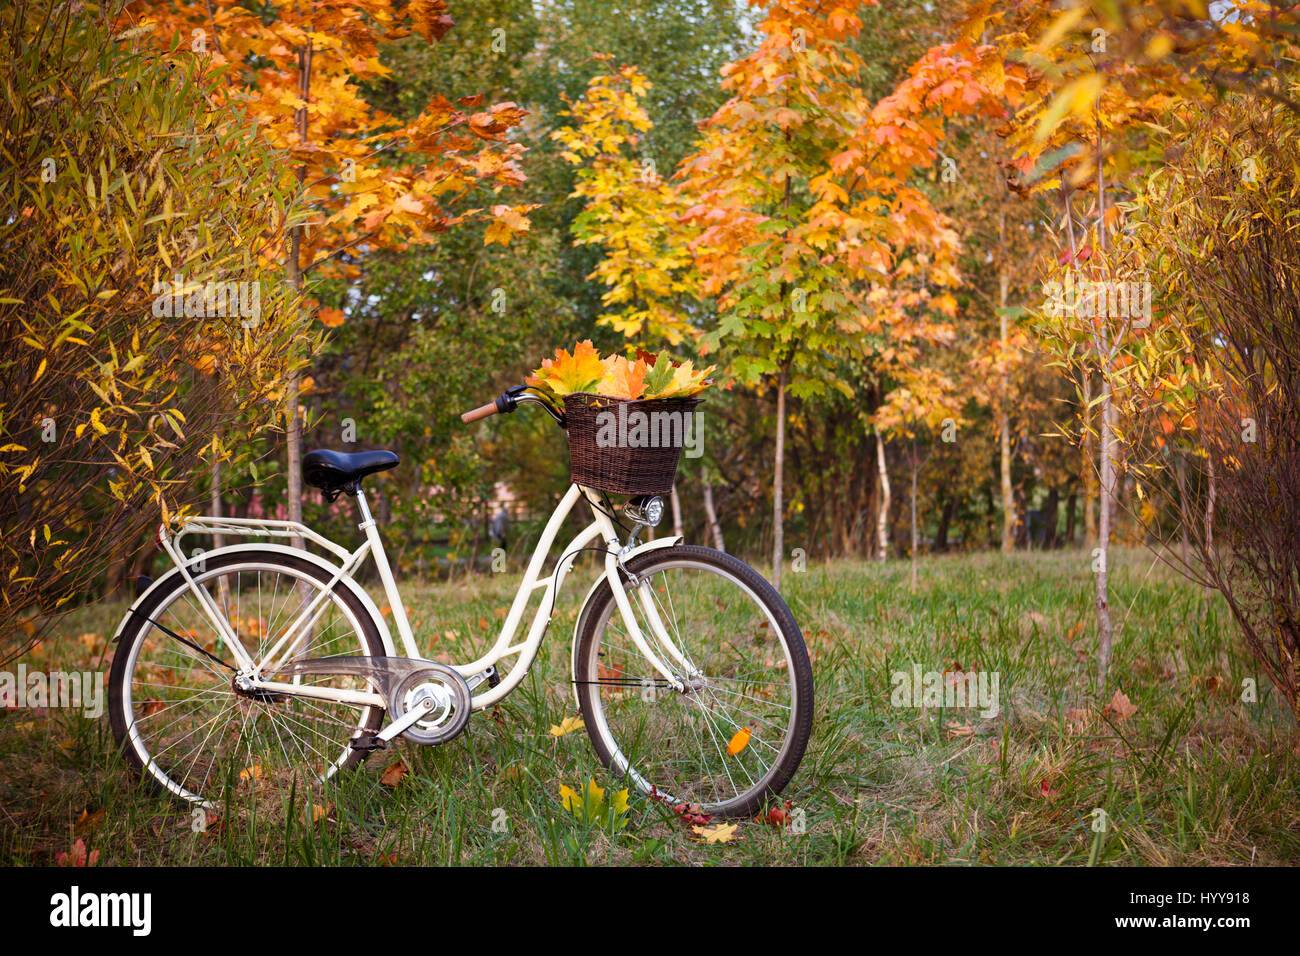 White retro style bicycle with basket with orange, yellow and green leaves, parked in the colorful autumn park Stock Photo